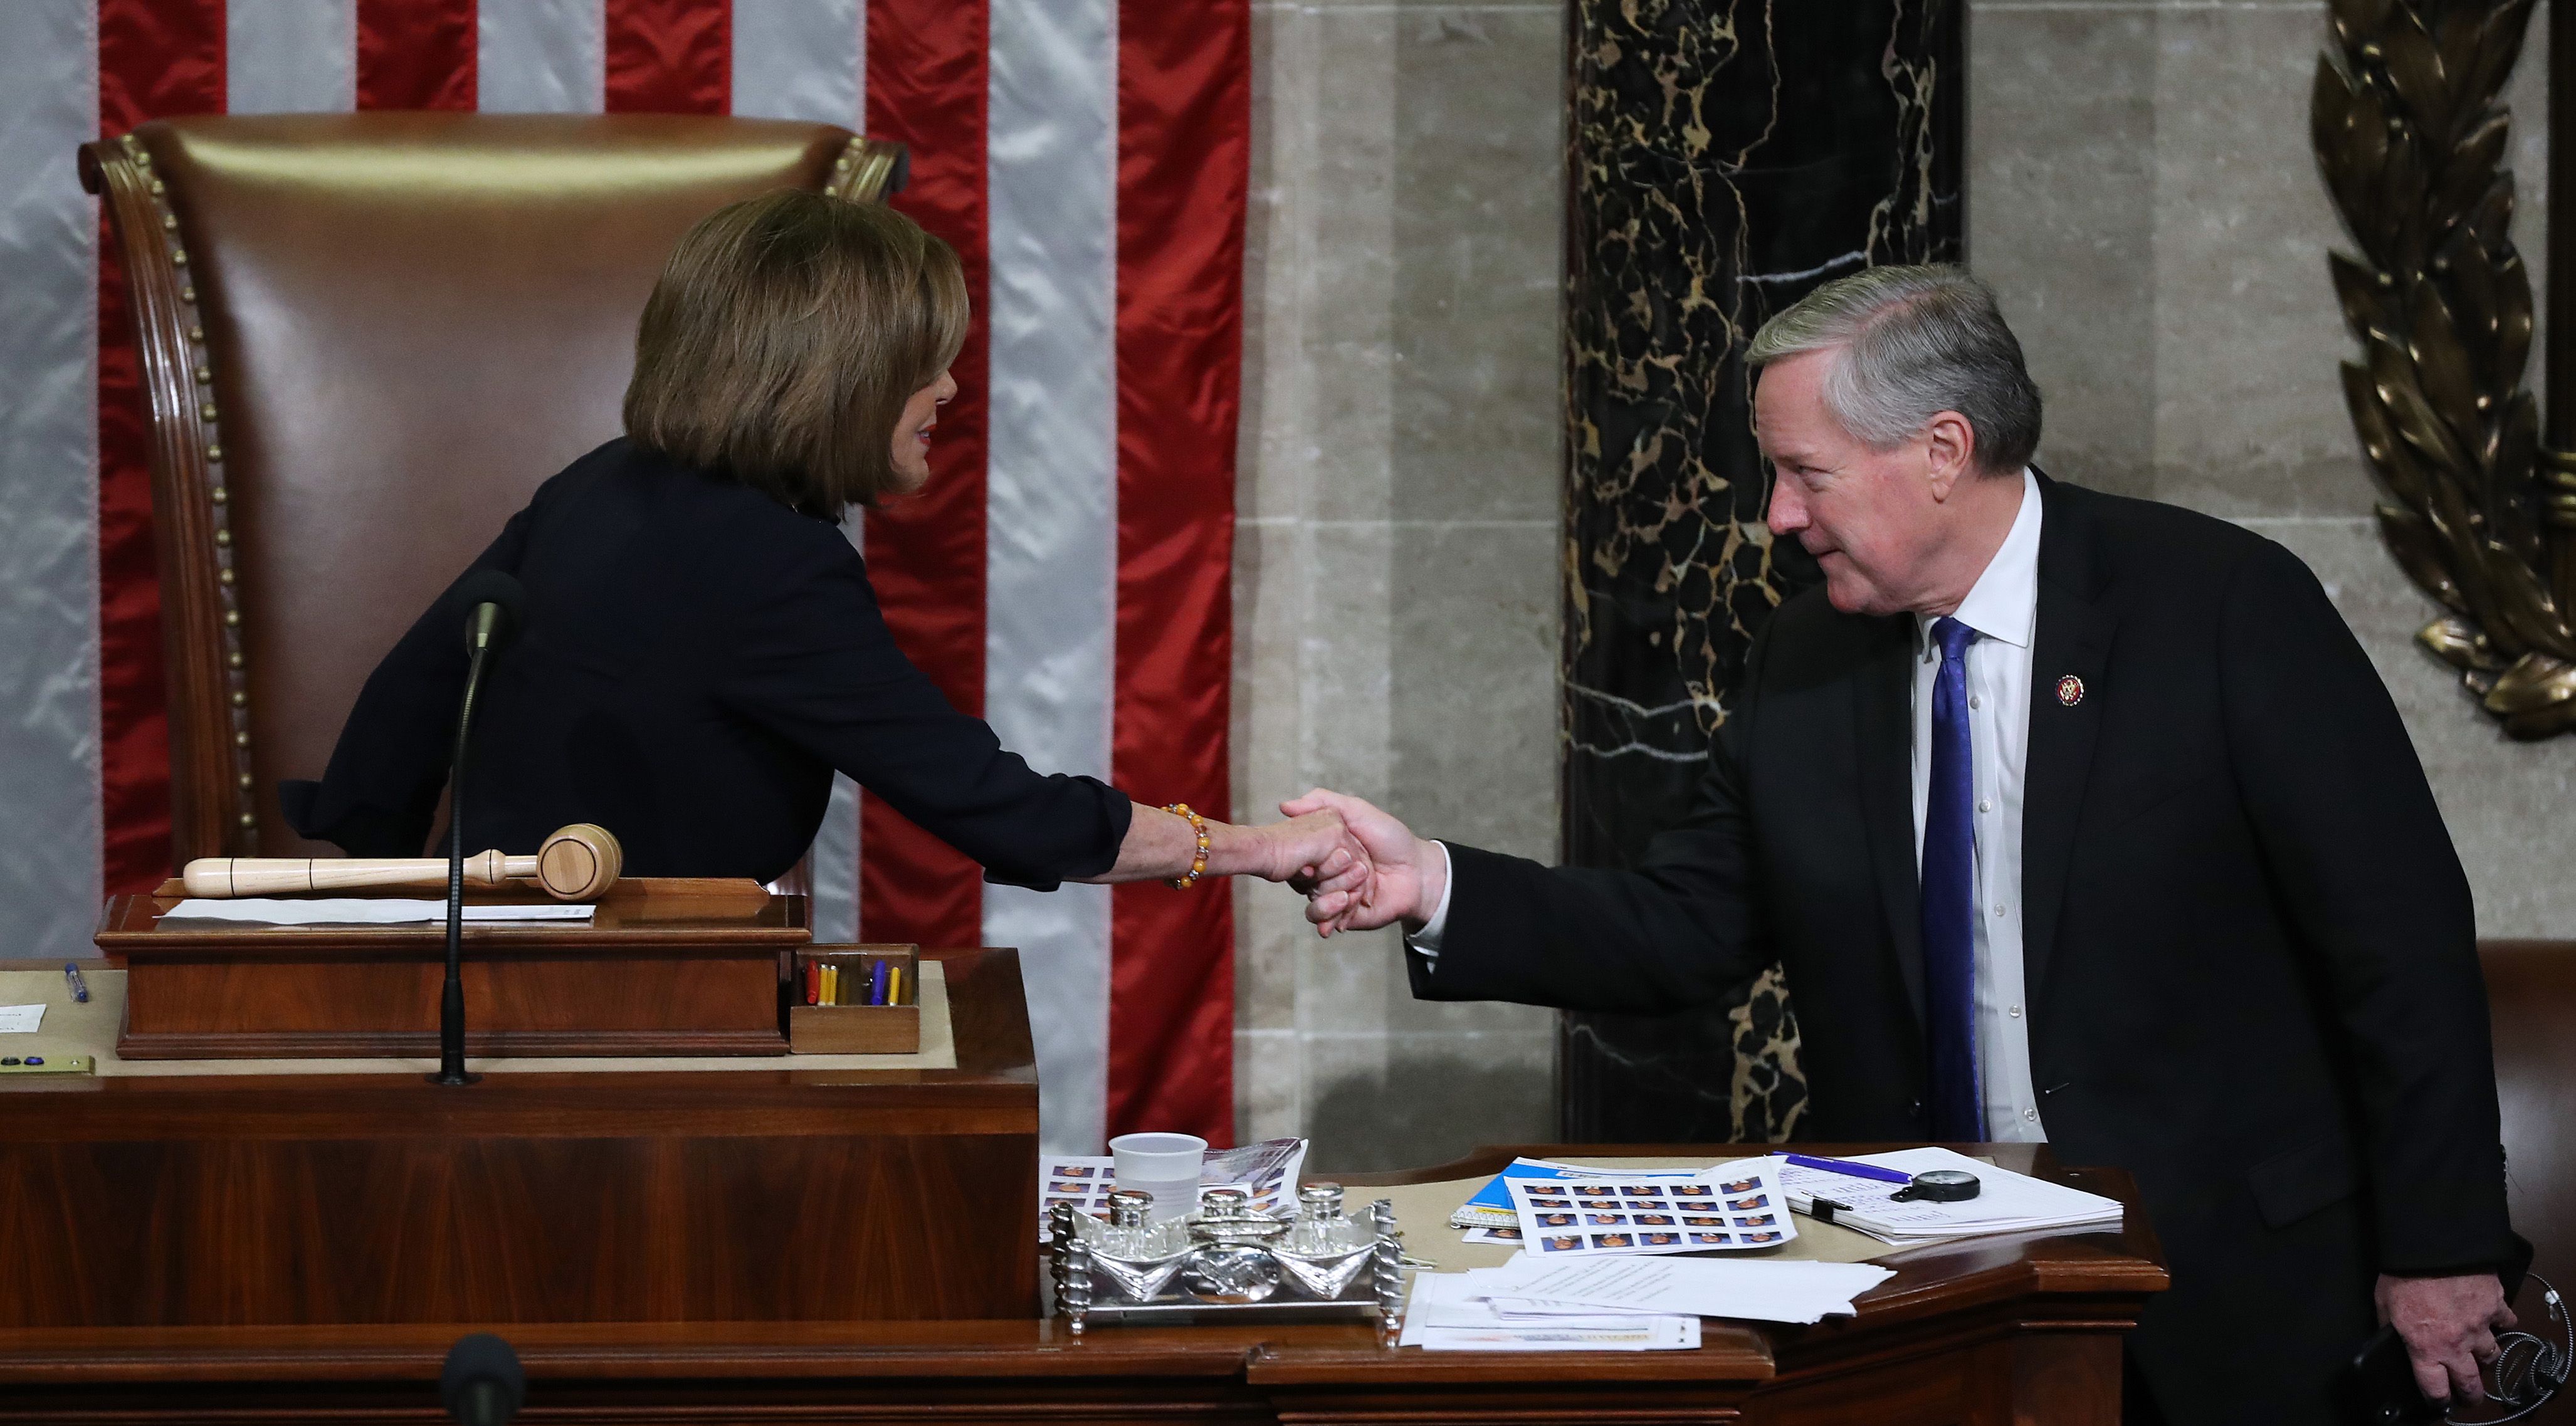 Speaker of the House Nancy Pelosi (D-CA) (L) shakes hand with Rep. Mark Meadows (R-NC) as she presides over the House of Representatives as they vote on the second article of impeachment 